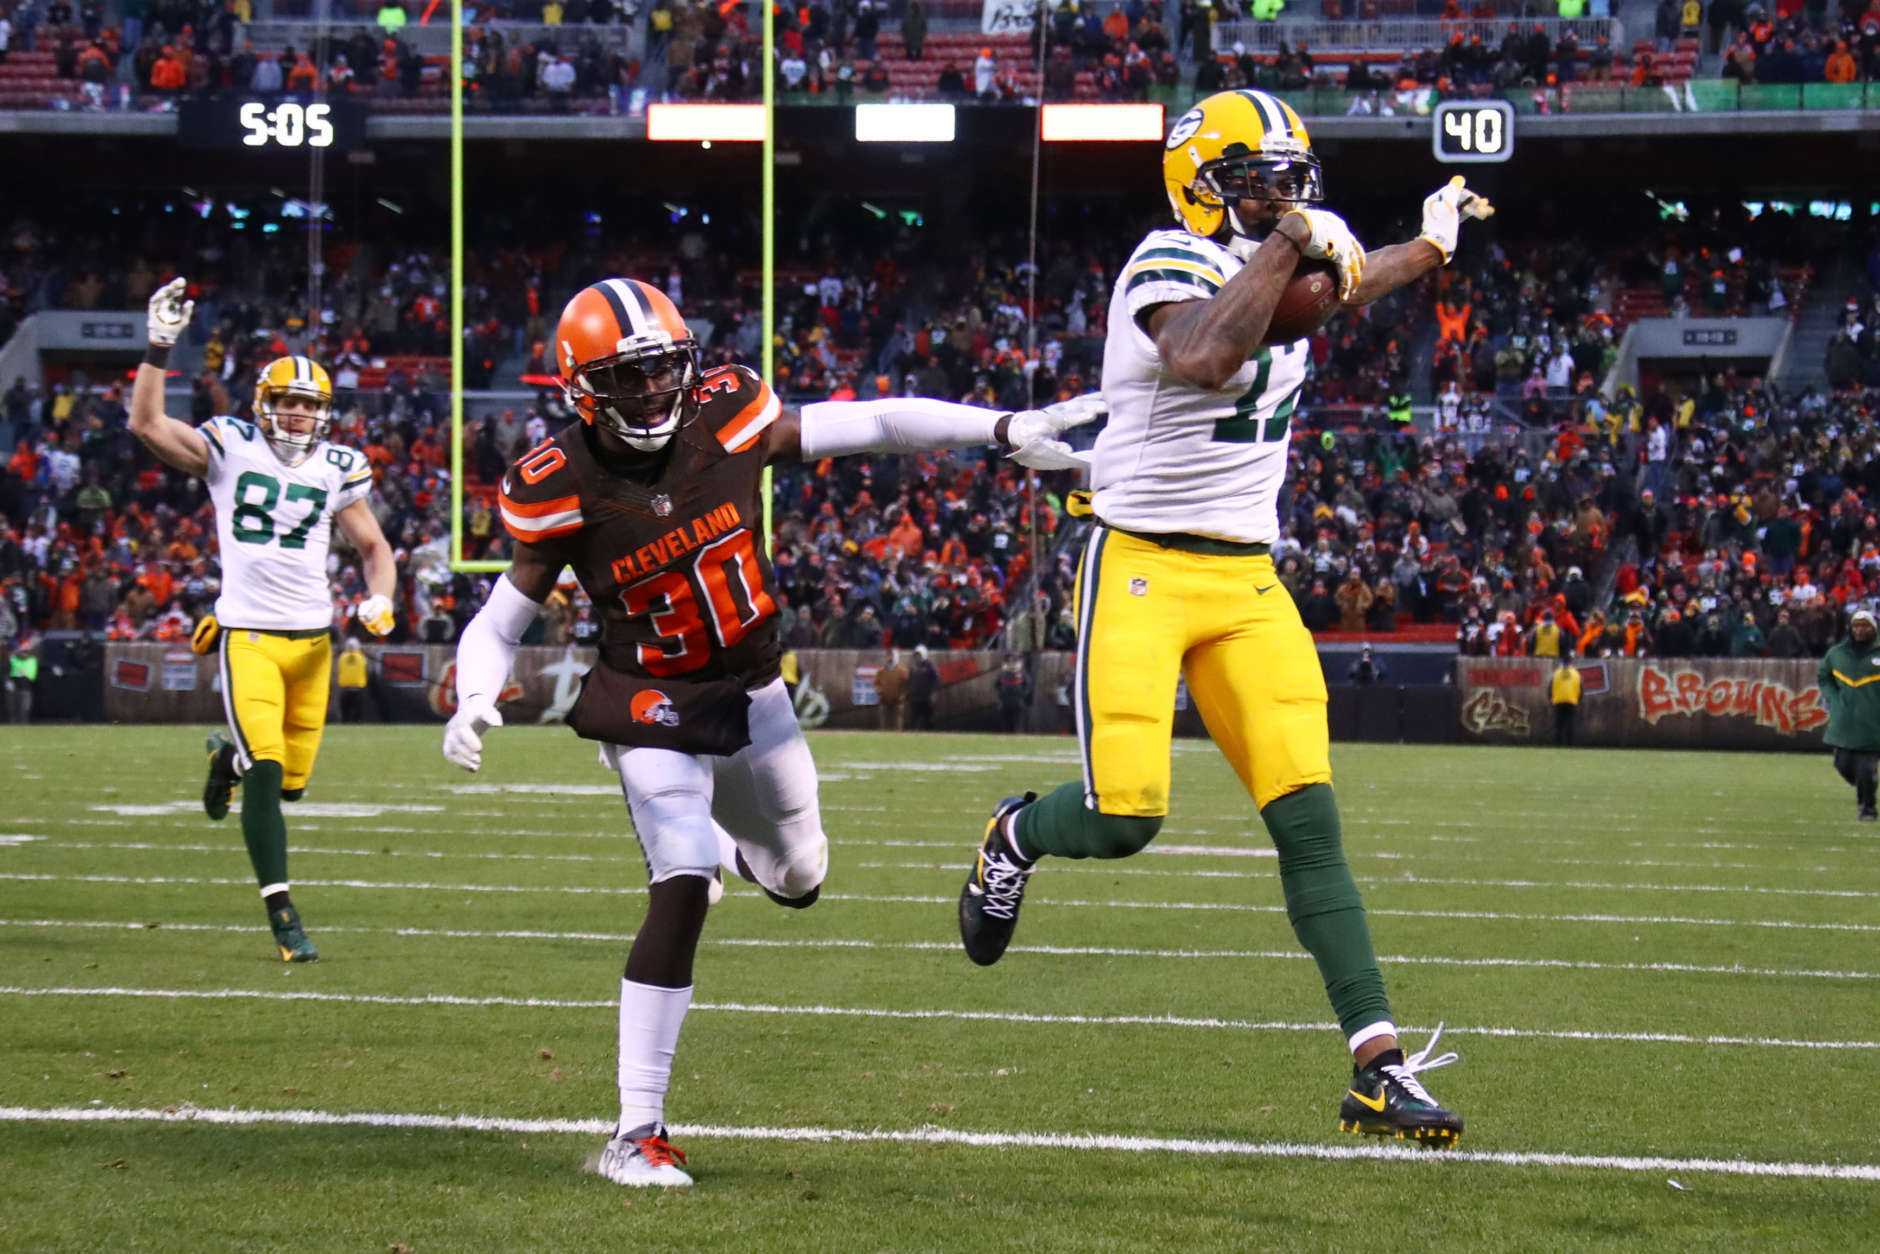 CLEVELAND, OH - DECEMBER 10: Davante Adams #17 of the Green Bay Packers scores the game-winning touchdown in overtime of a 27-21 victory over the Cleveland Browns at FirstEnergy Stadium on December 10, 2017 in Cleveland, Ohio. (Photo by Gregory Shamus/Getty Images)